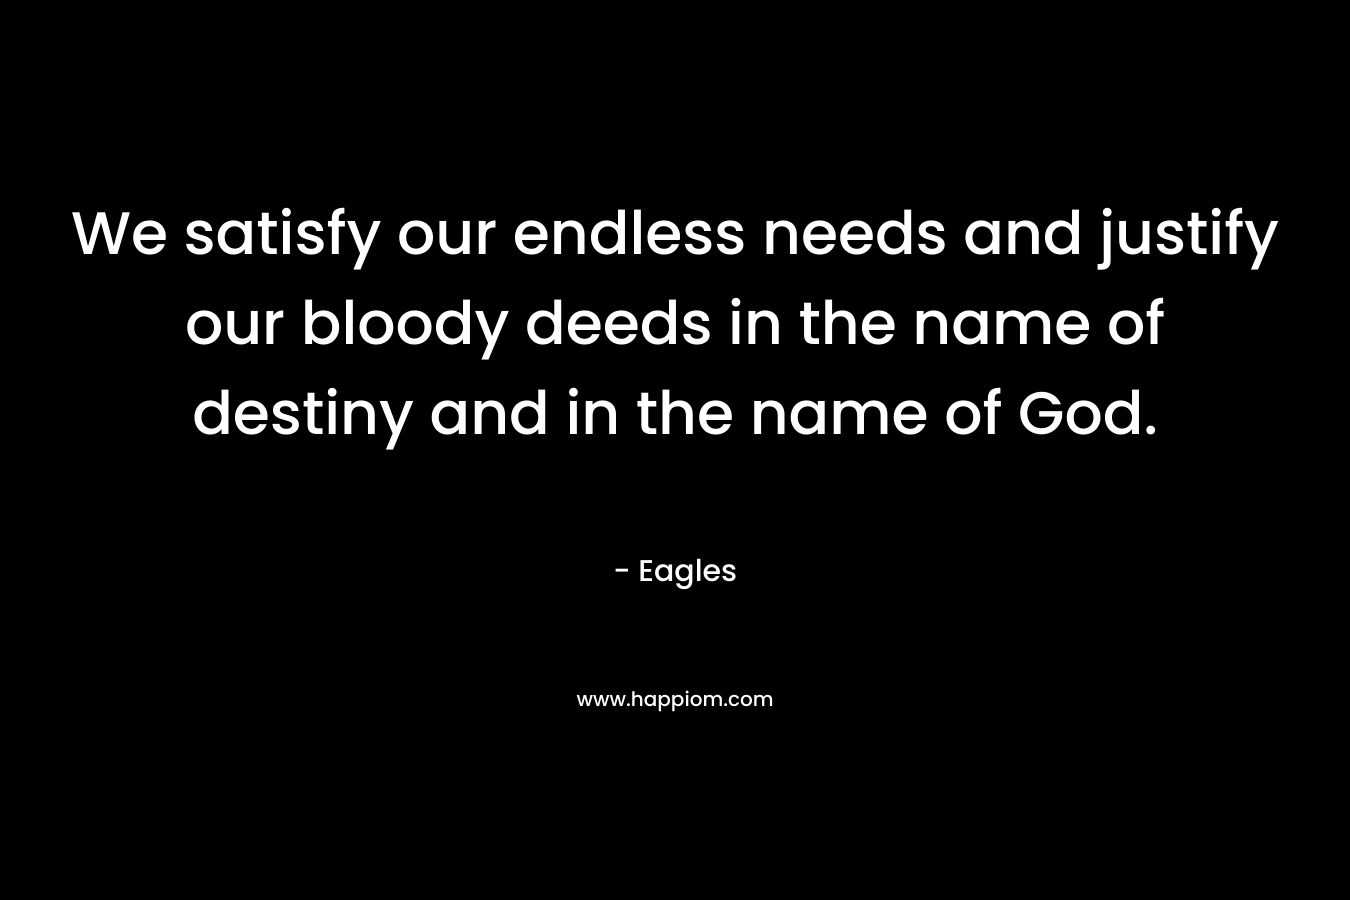 We satisfy our endless needs and justify our bloody deeds in the name of destiny and in the name of God. – Eagles